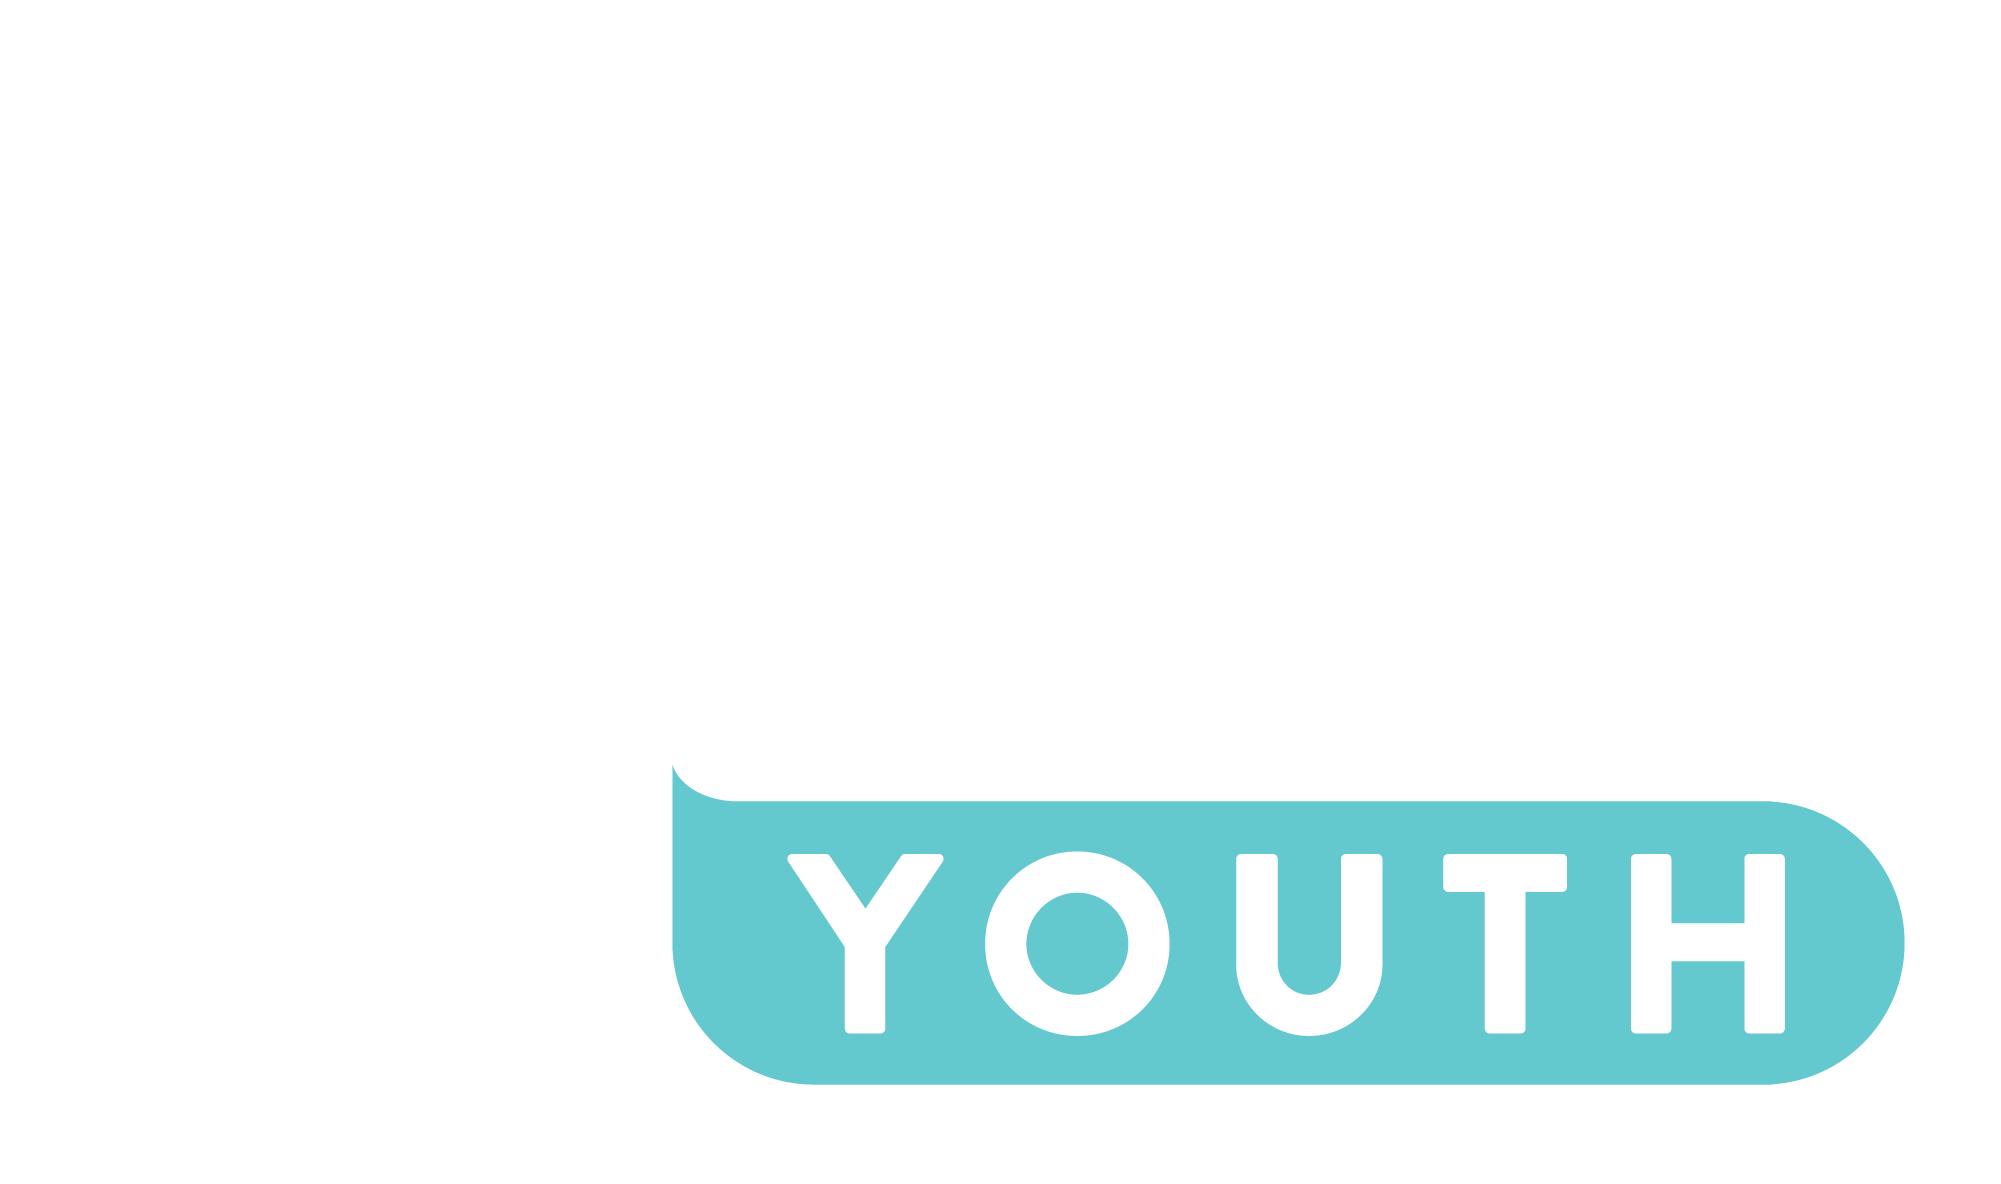 Voice For Life Youth